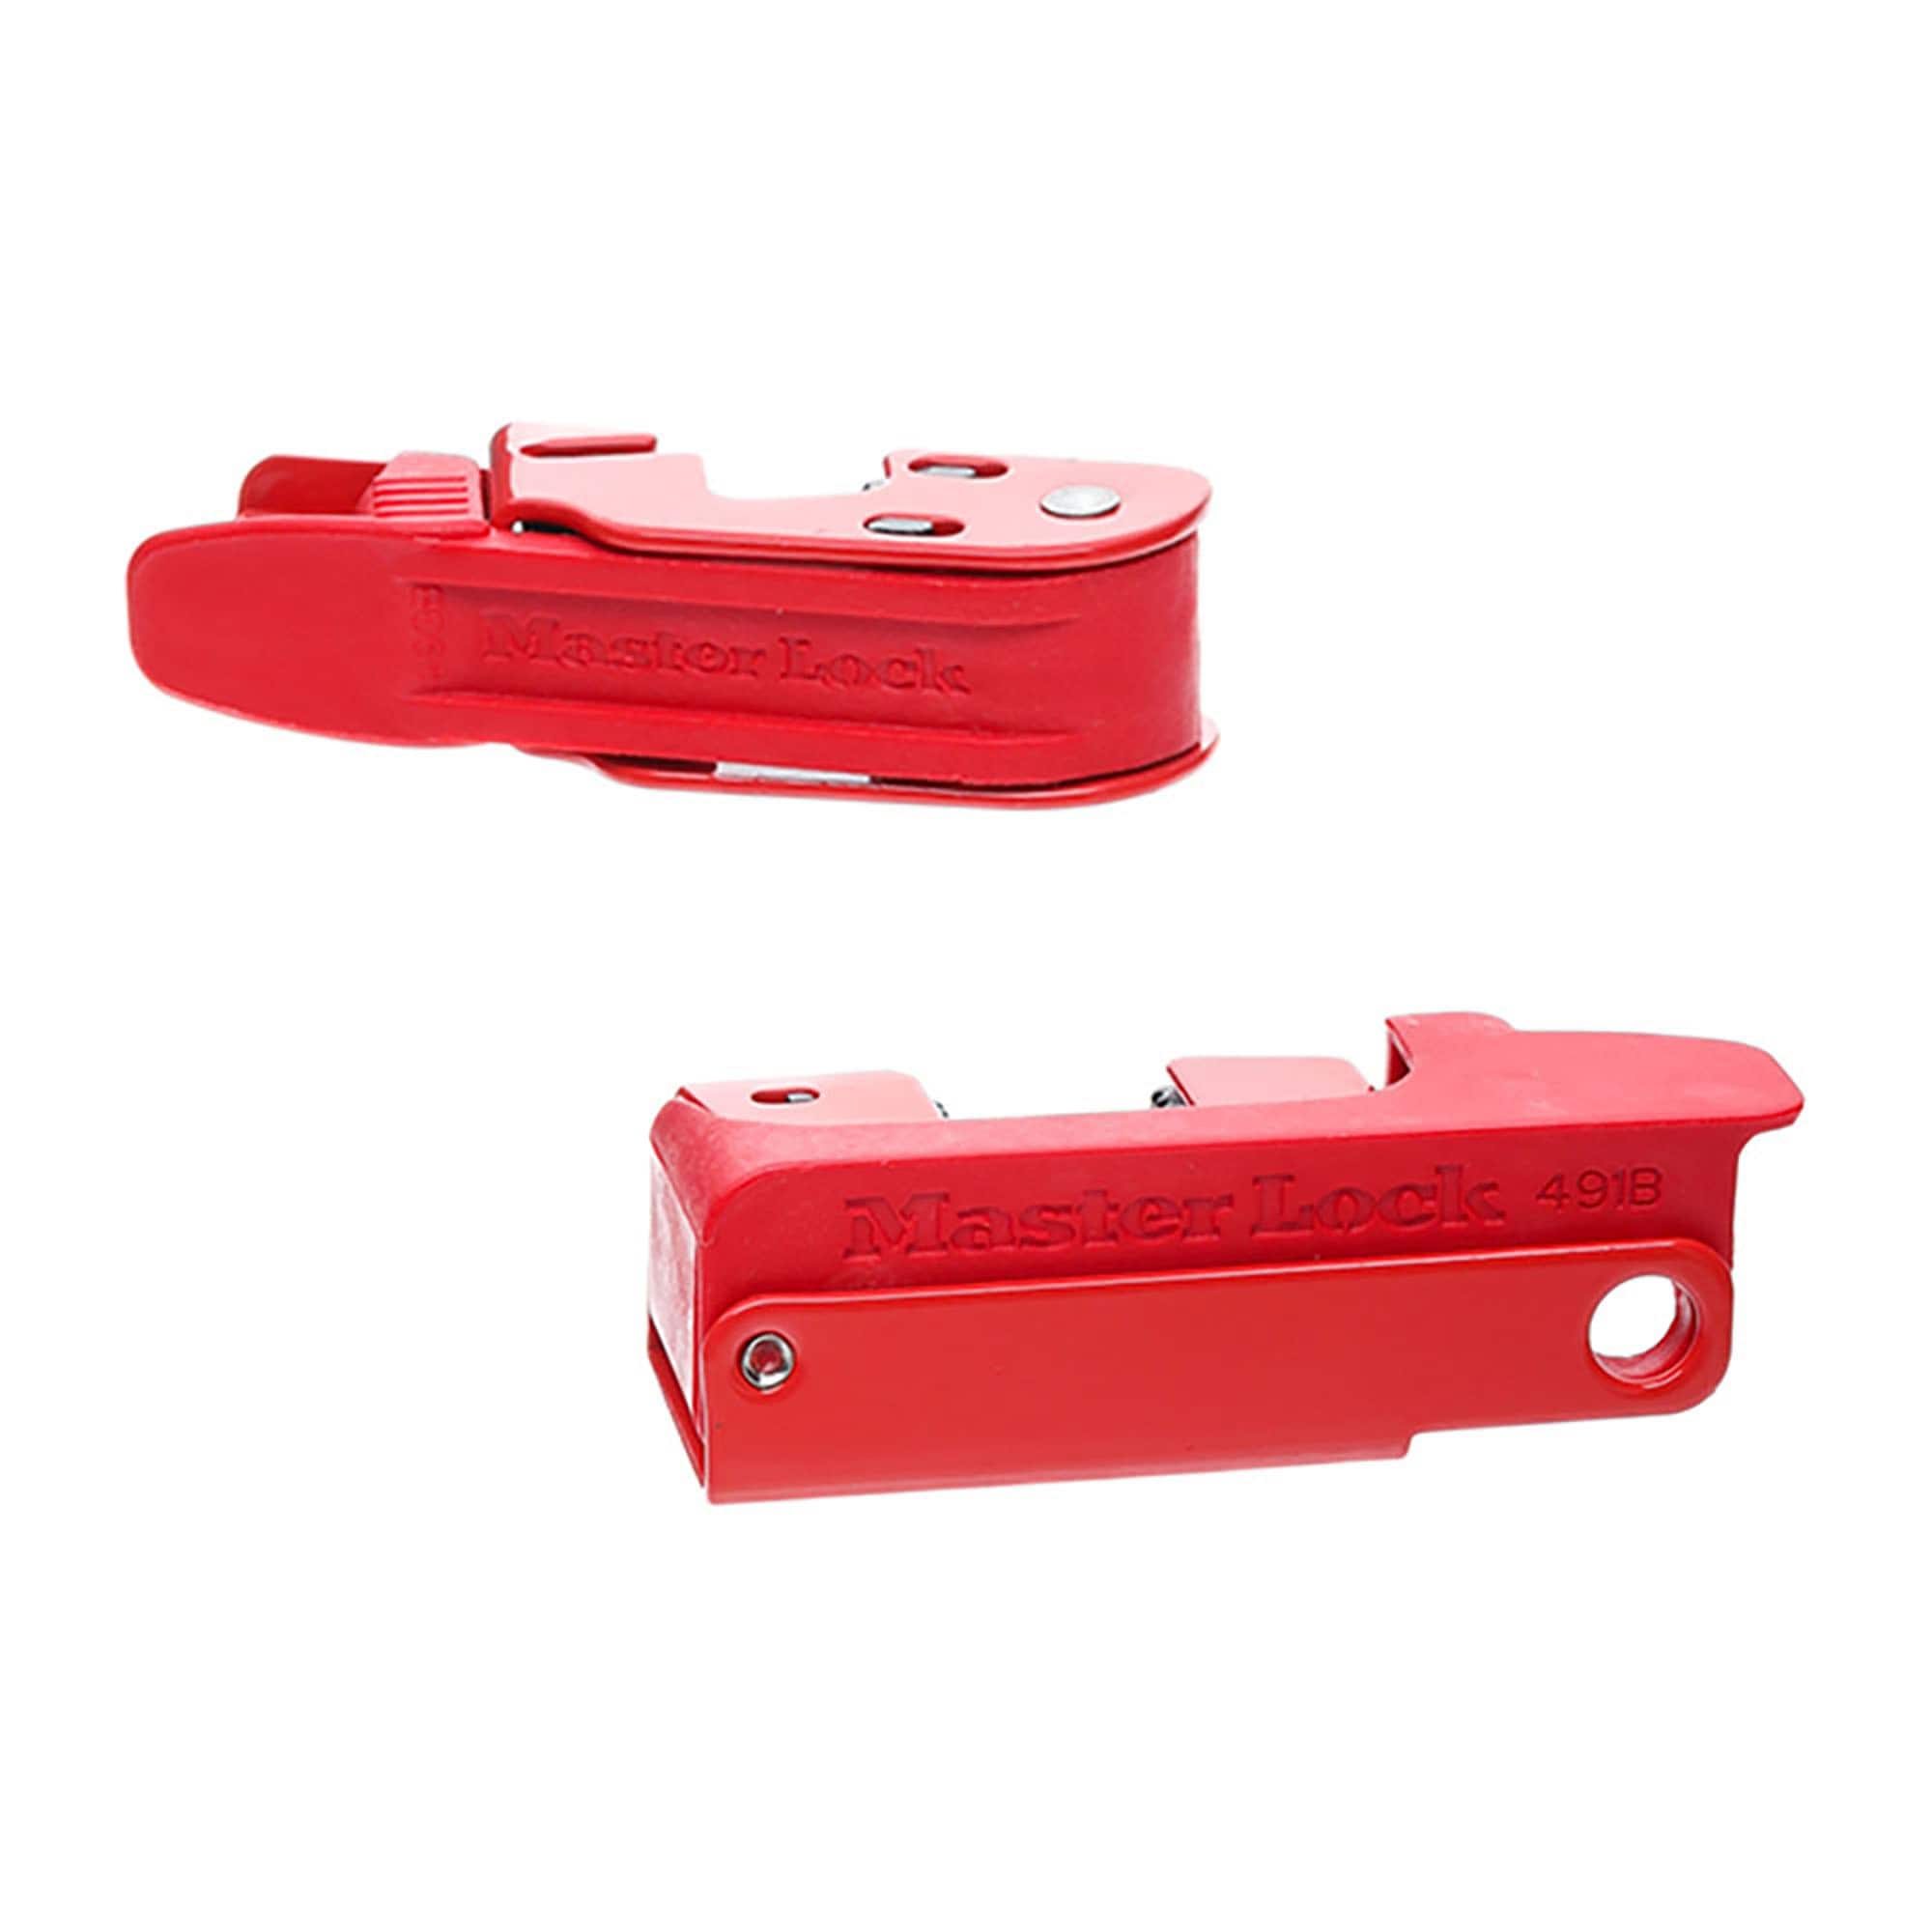 Grip Tight interlock for circuit breakers - Unique Safety Products